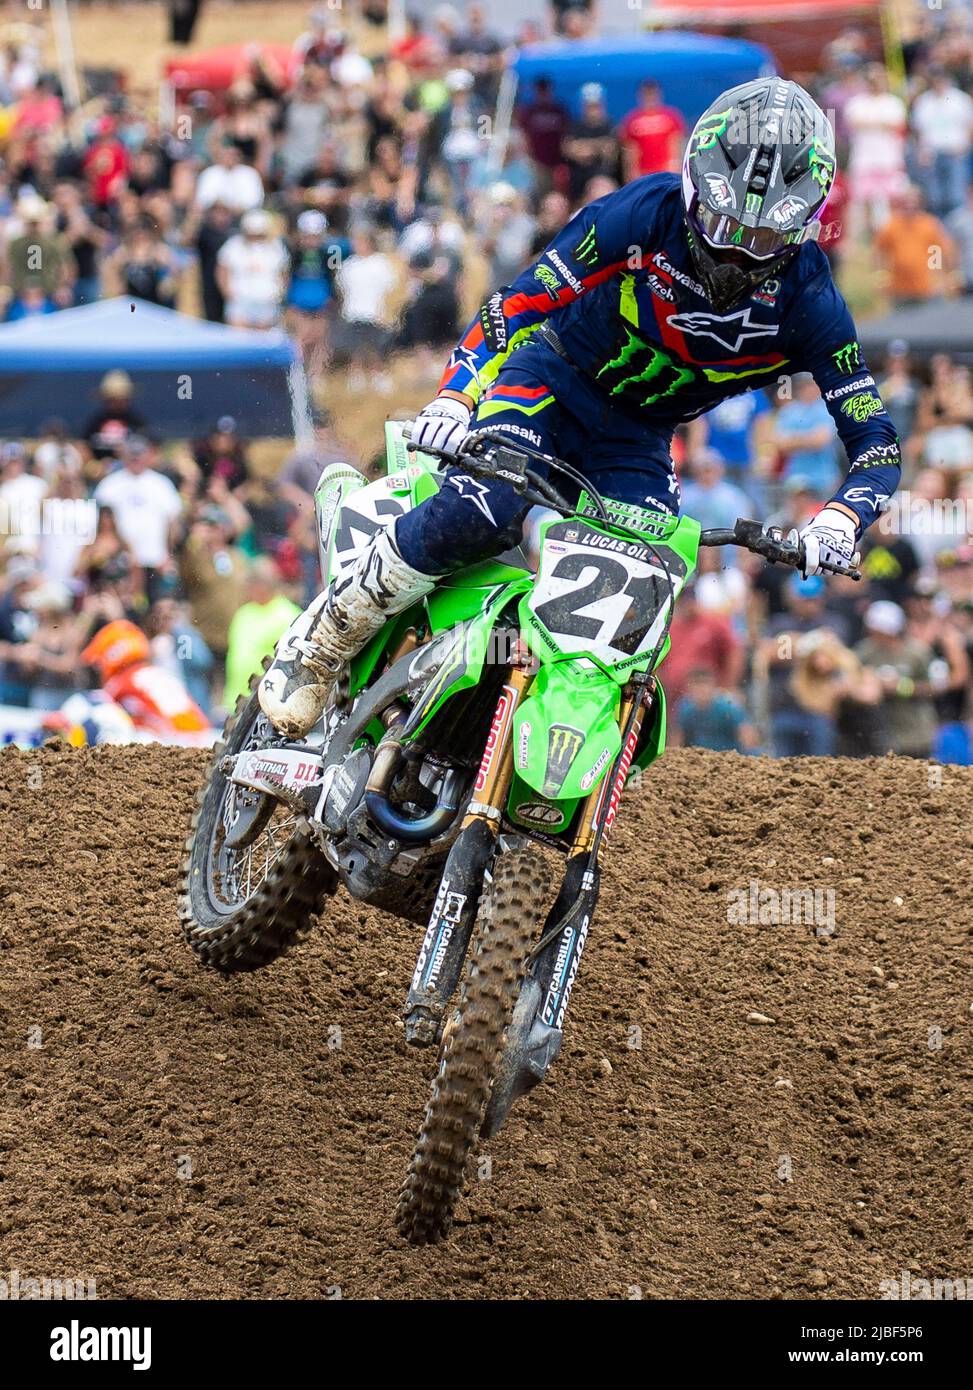 Rancho Cordova, CA USA, June 04 2022, Jason Anderson coming out of turn 21  during the Lucas Oil Pro Motocross Hangtown Classic 450 moto 1 at Hangtown  Rancho Cordova, CA Thurman James/CSM Stock Photo - Alamy